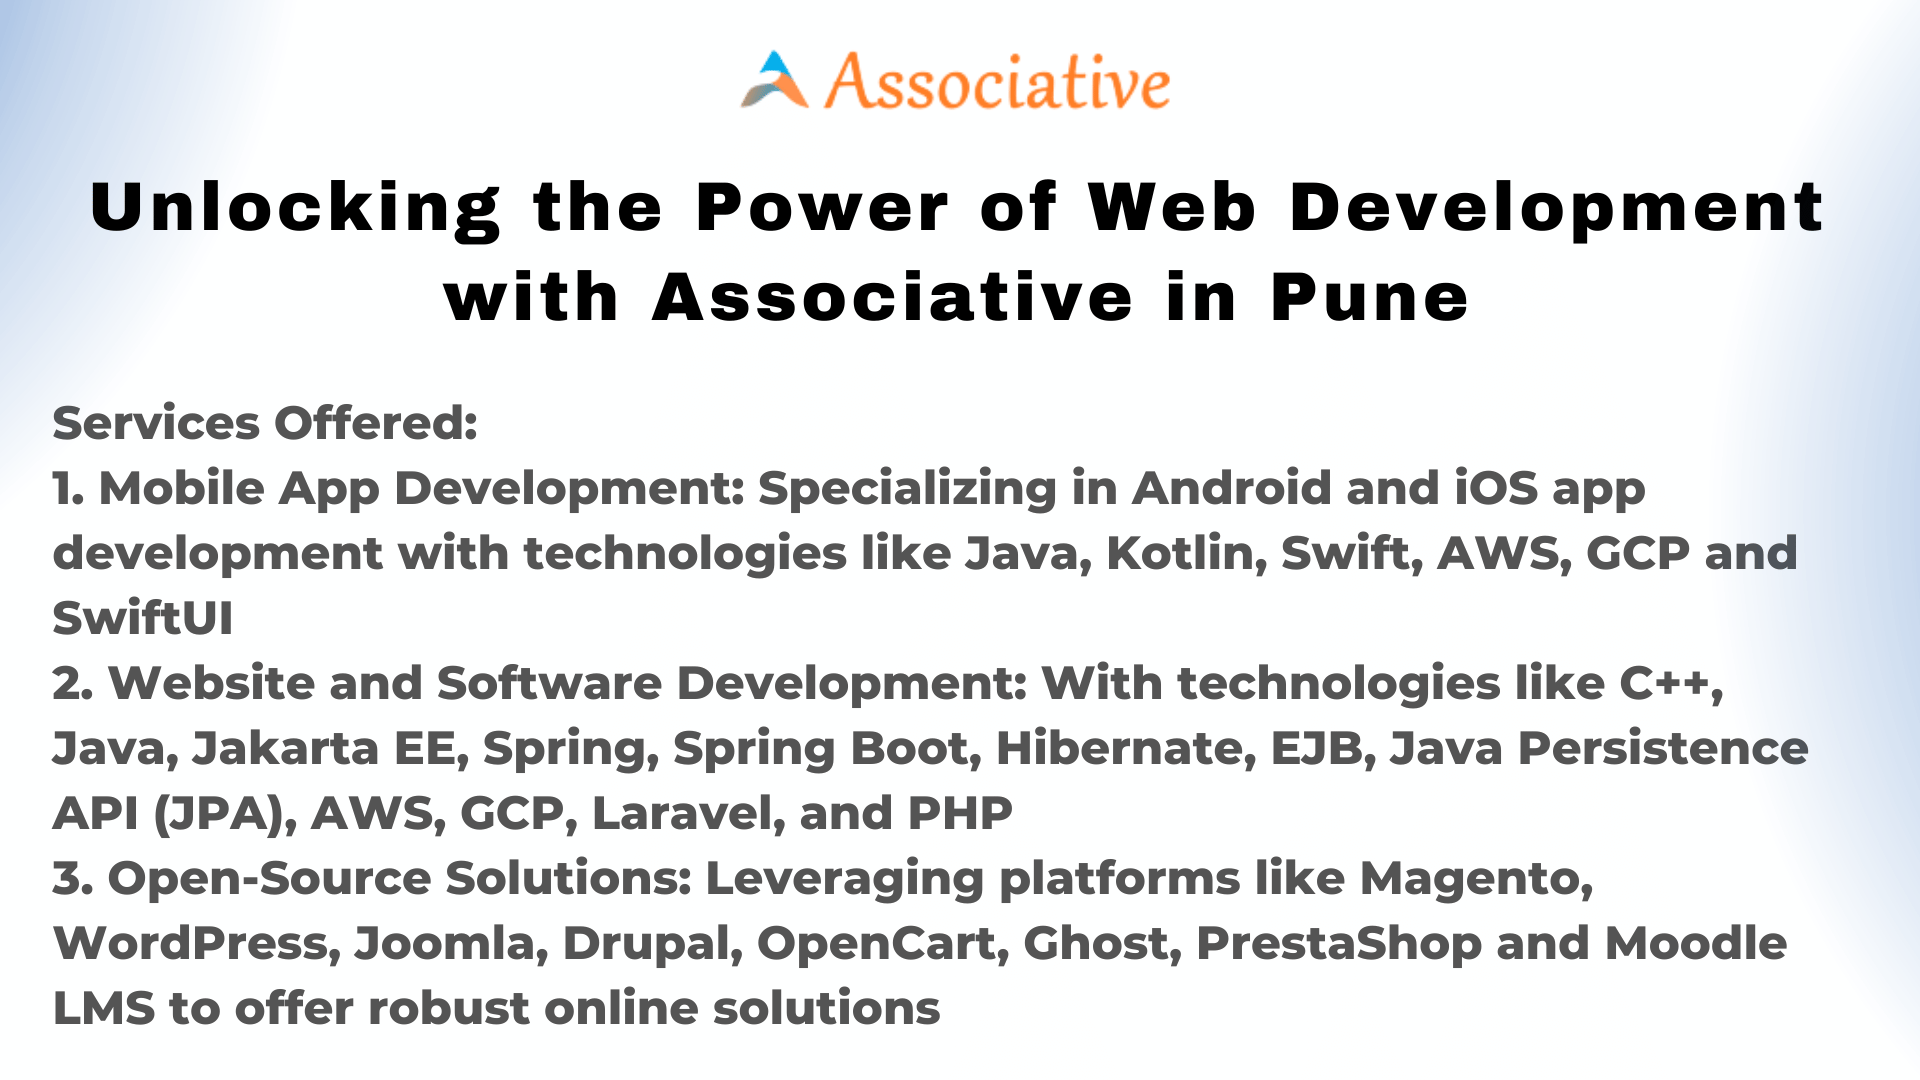 Unlocking the Power of Web Development with Associative in Pune